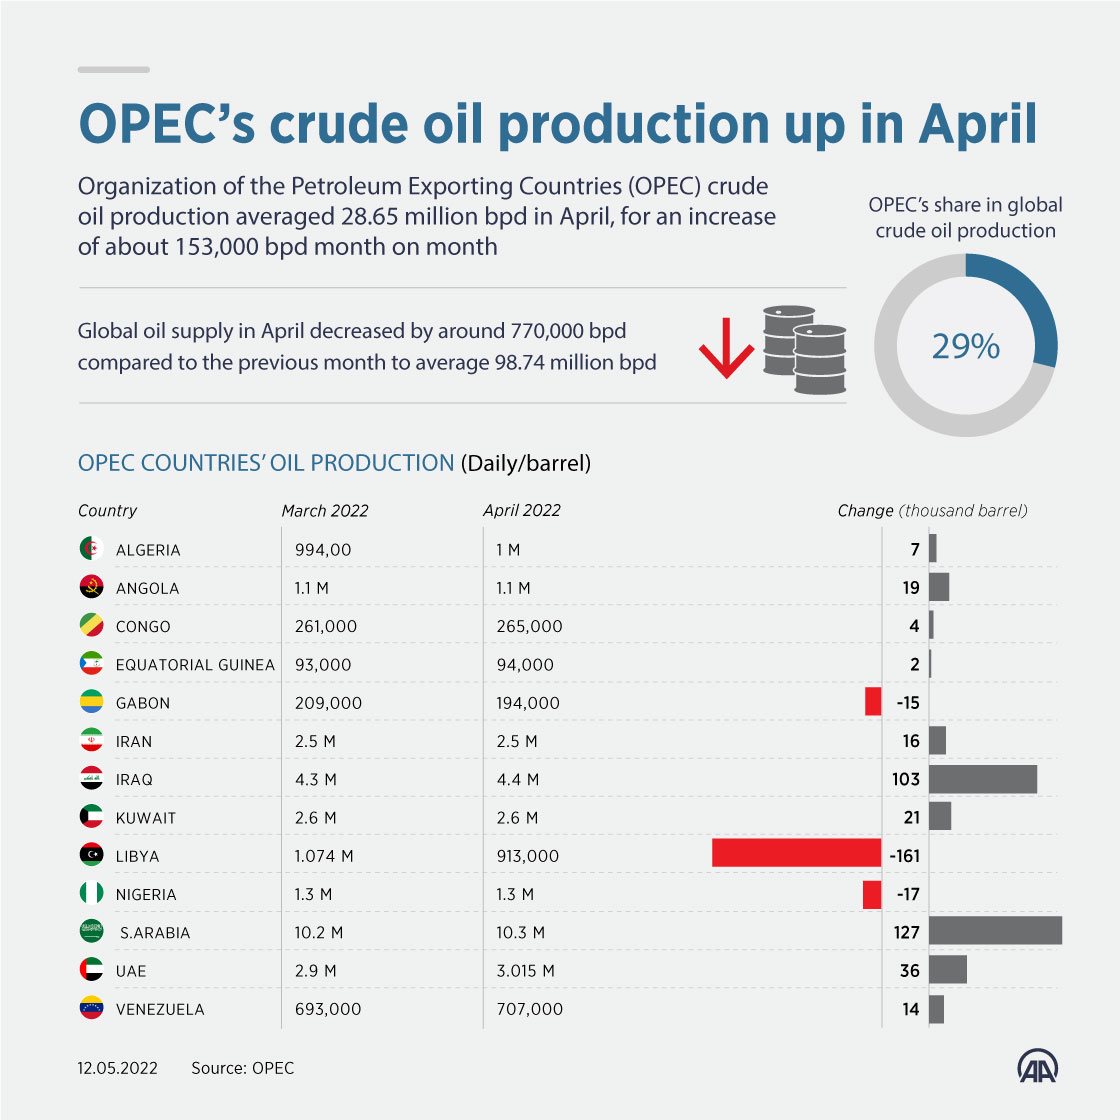 OPEC’s crude oil production up in April